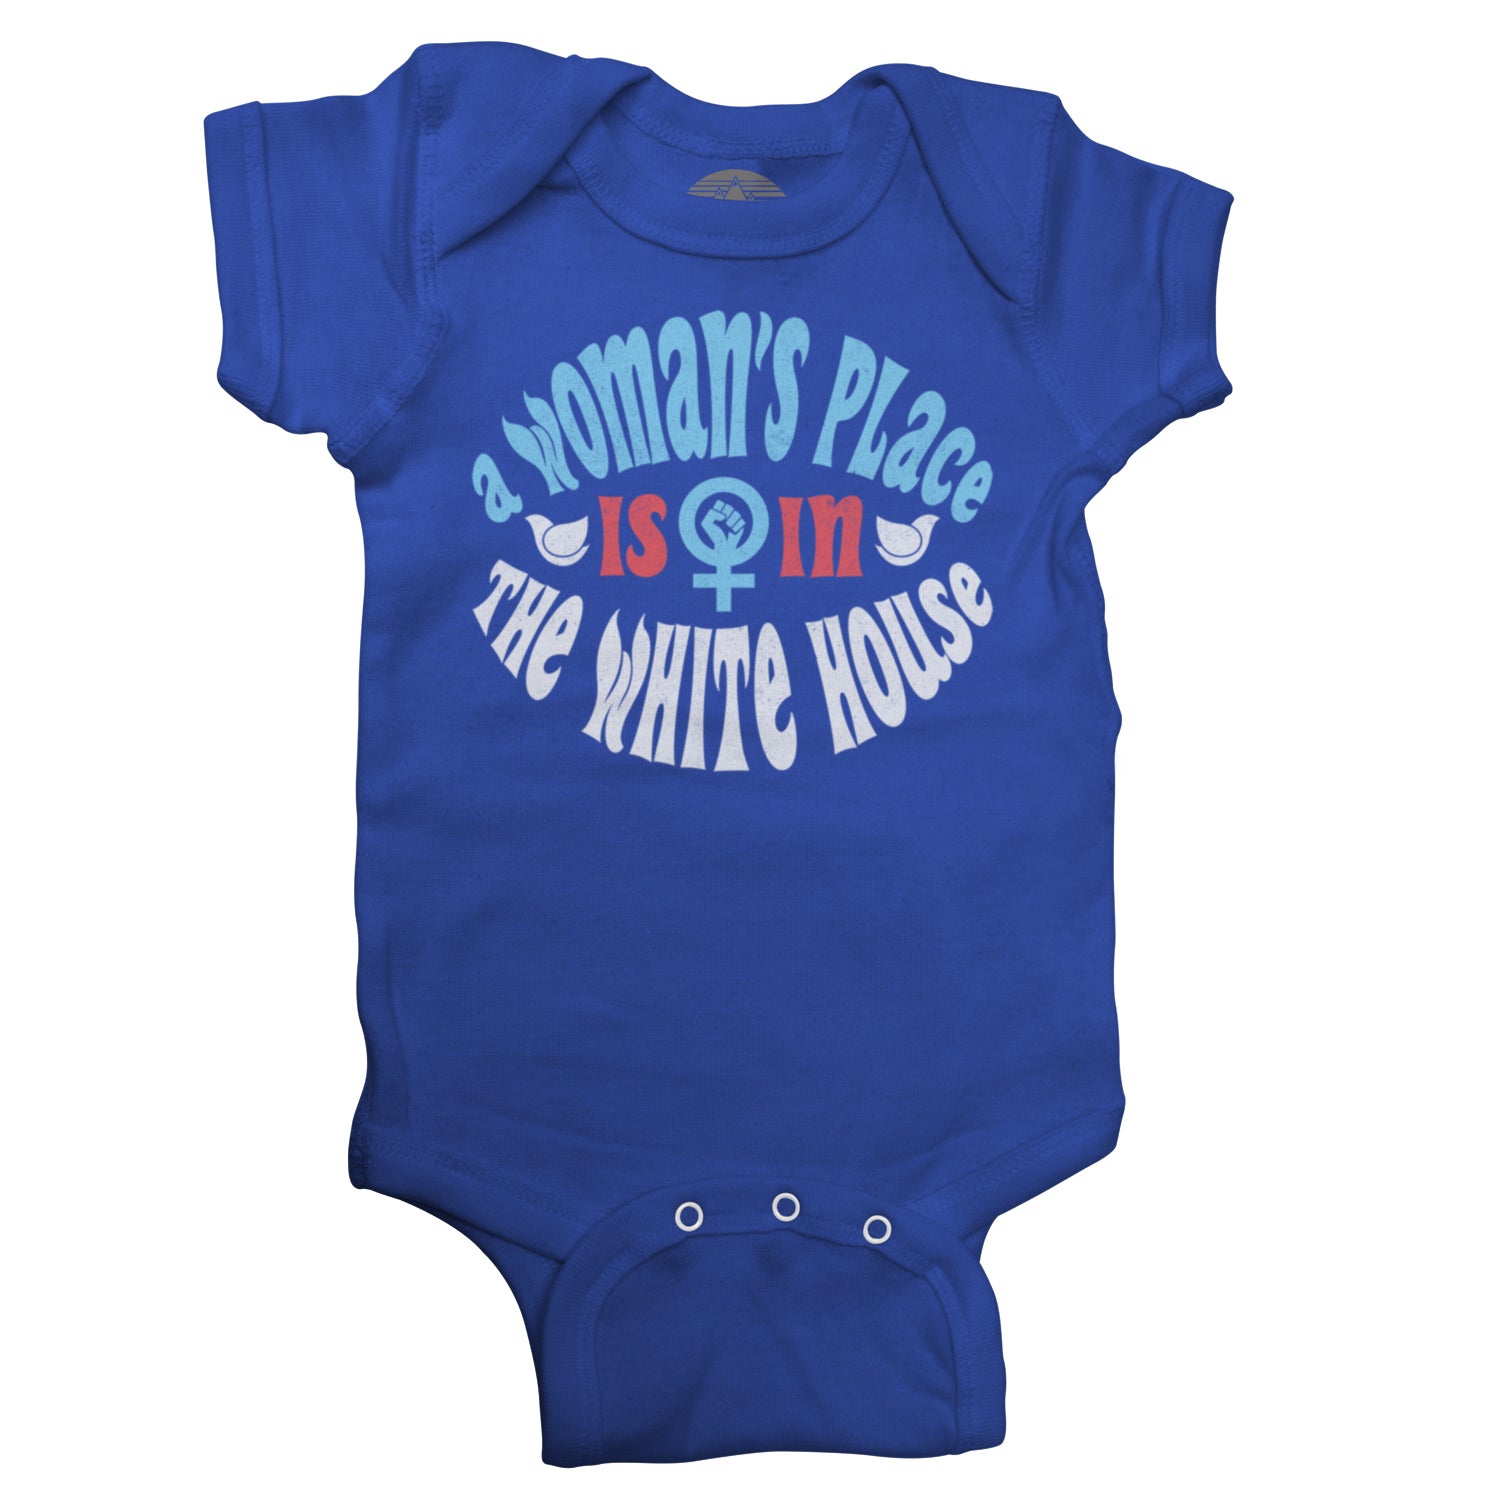 A Woman's Place is in The White House Infant Bodysuit - Unisex Fit